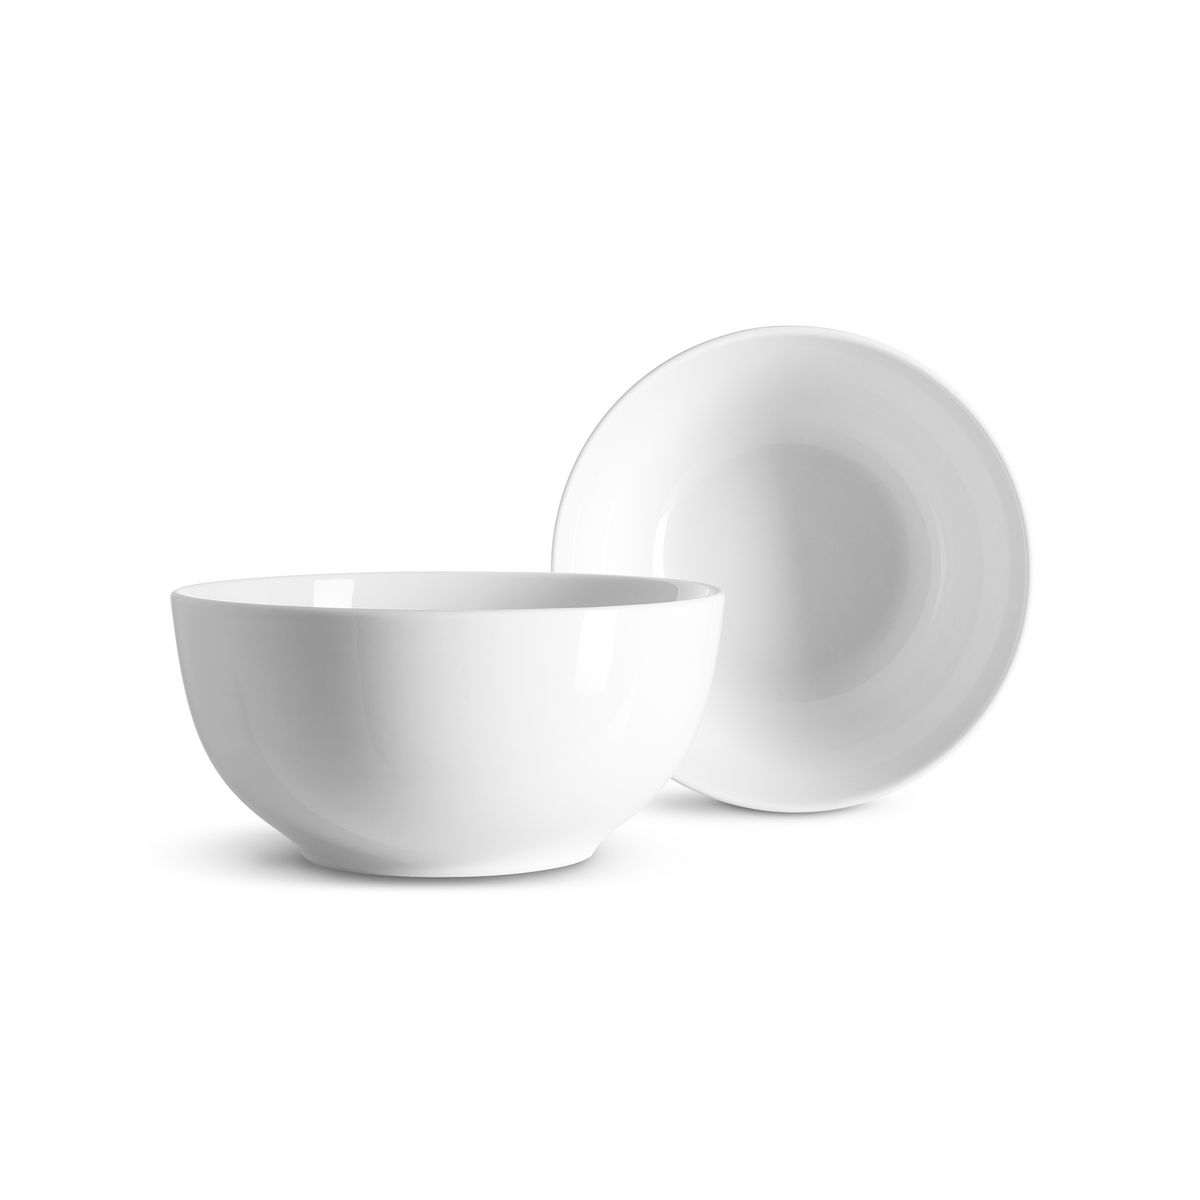 Pair of ramen bowls, showing the extra depth and width.